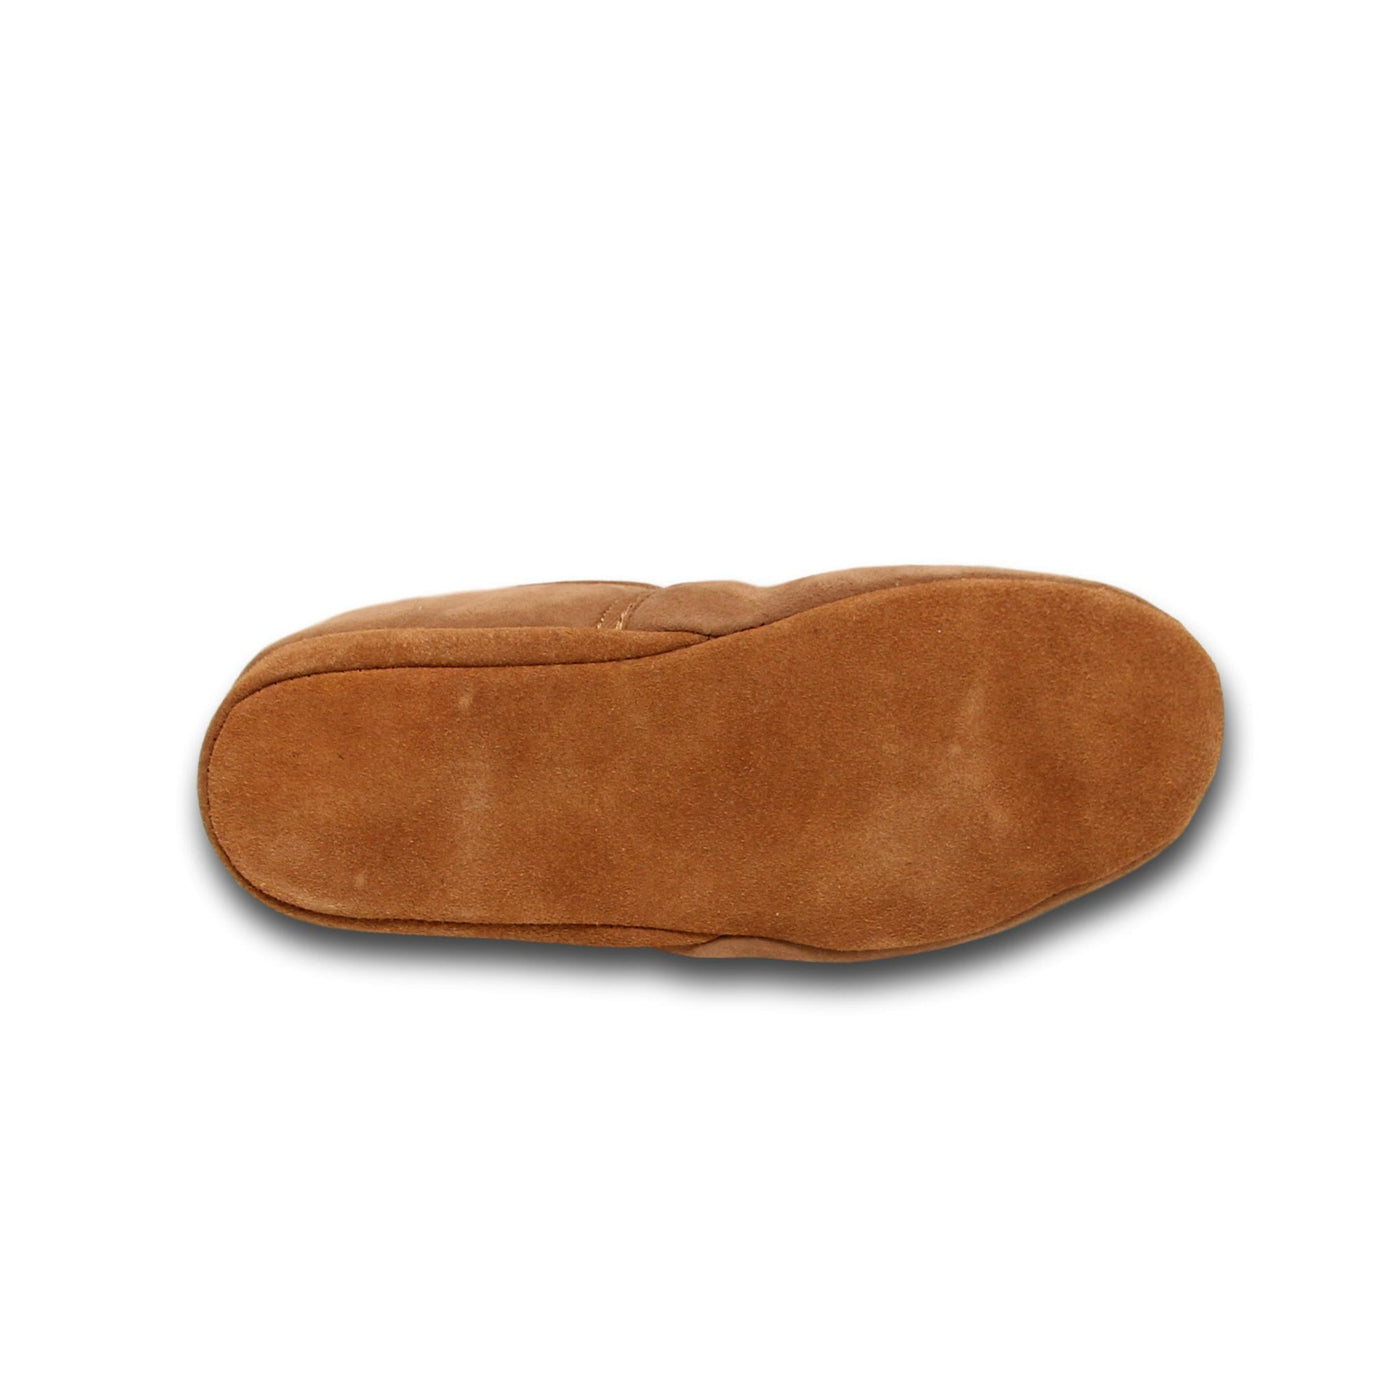 Deluxe Mens 'Noah' Sheepskin Slippers with Soft Sole - Chestnut ...